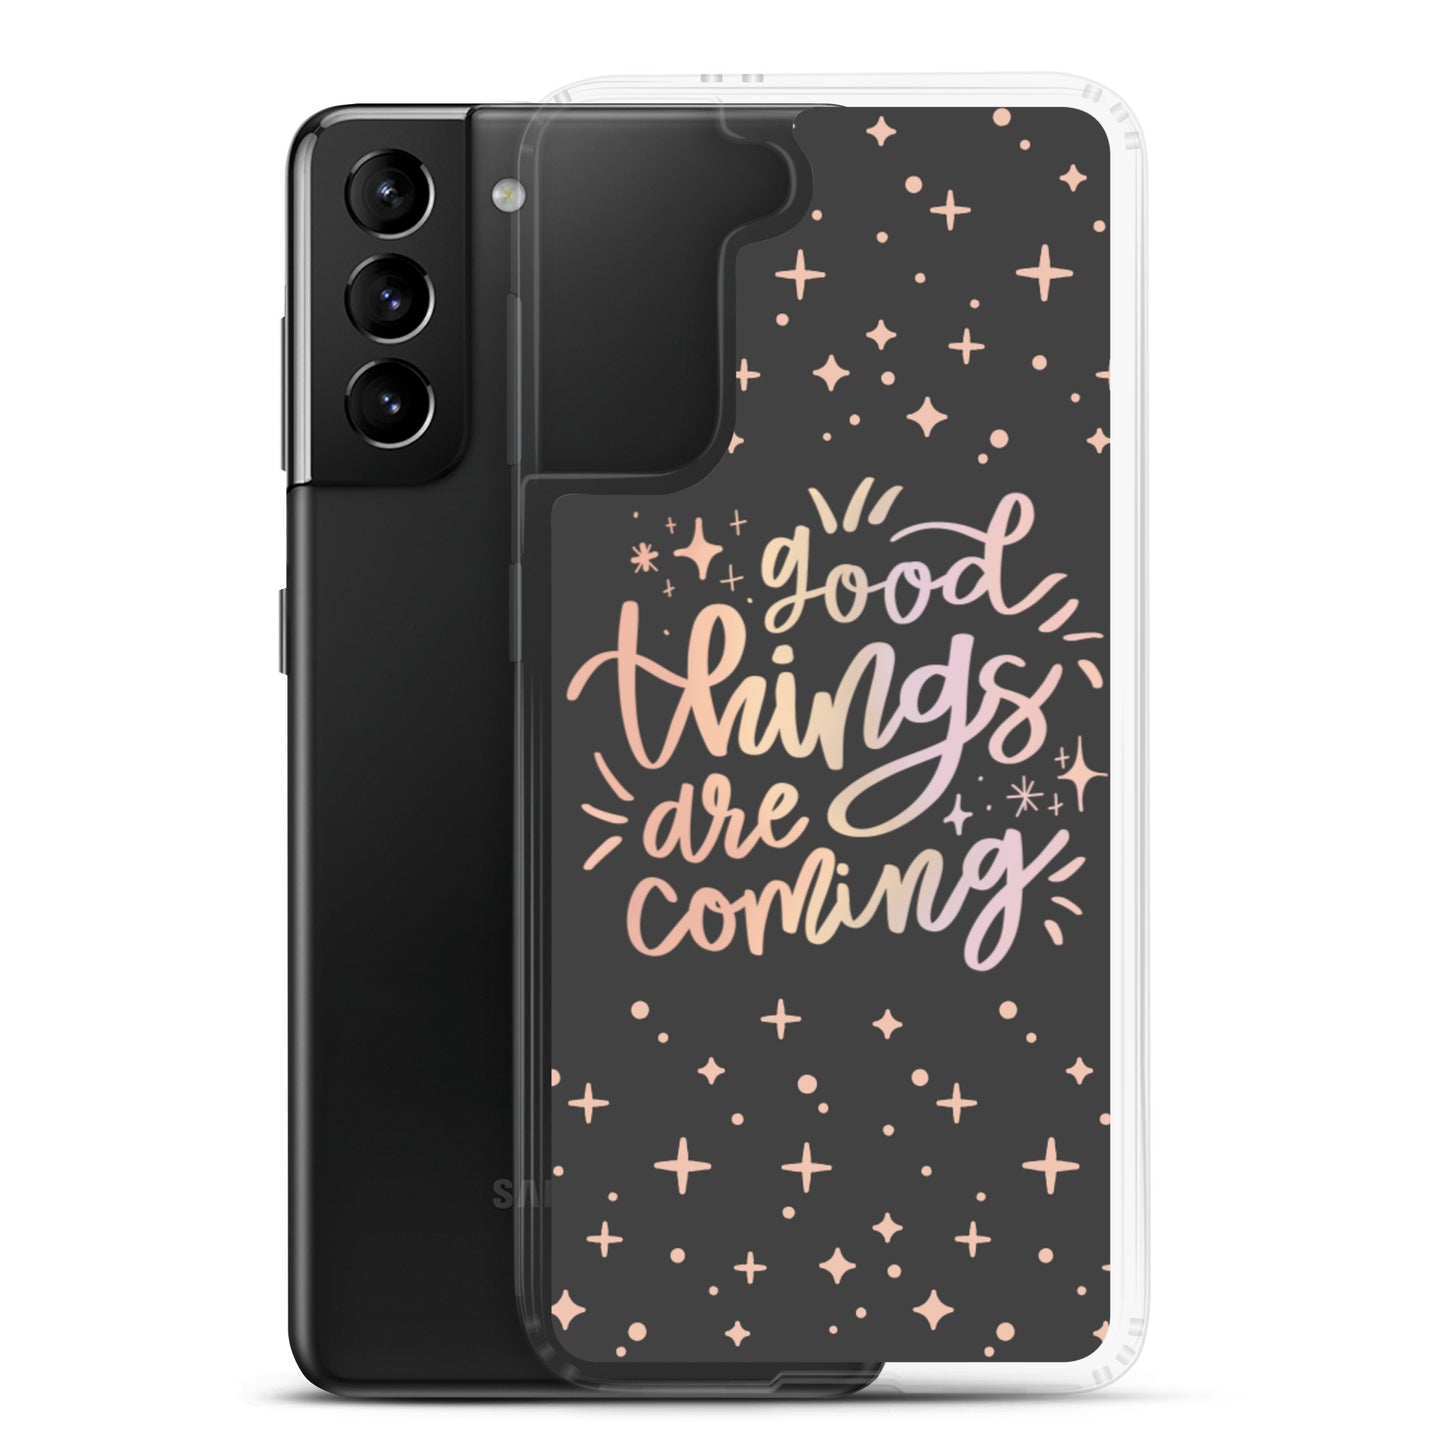 Good Things Are Coming Samsung Case